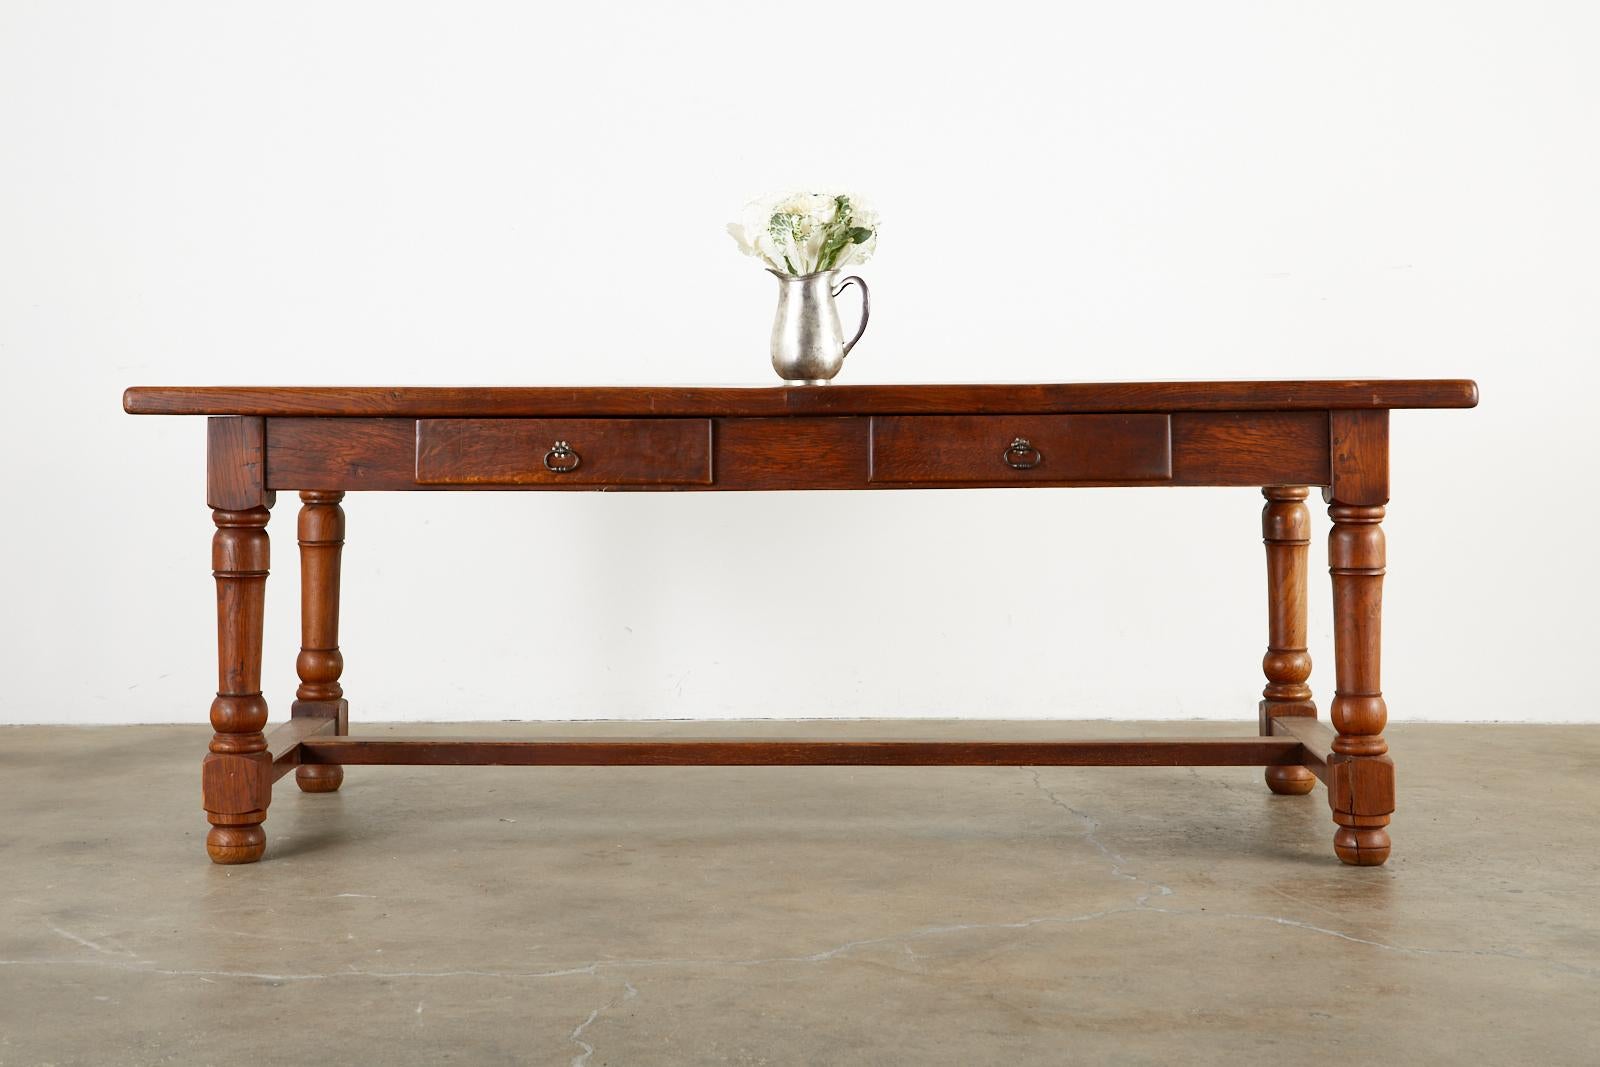 Quintessential 19th century country French Provincial farmhouse dining table. Constructed from rich oak with wood peg joinery. The top features 1.75 inch thick solid planks of oak with radiant grain patterns and knots. Supported by a substantial